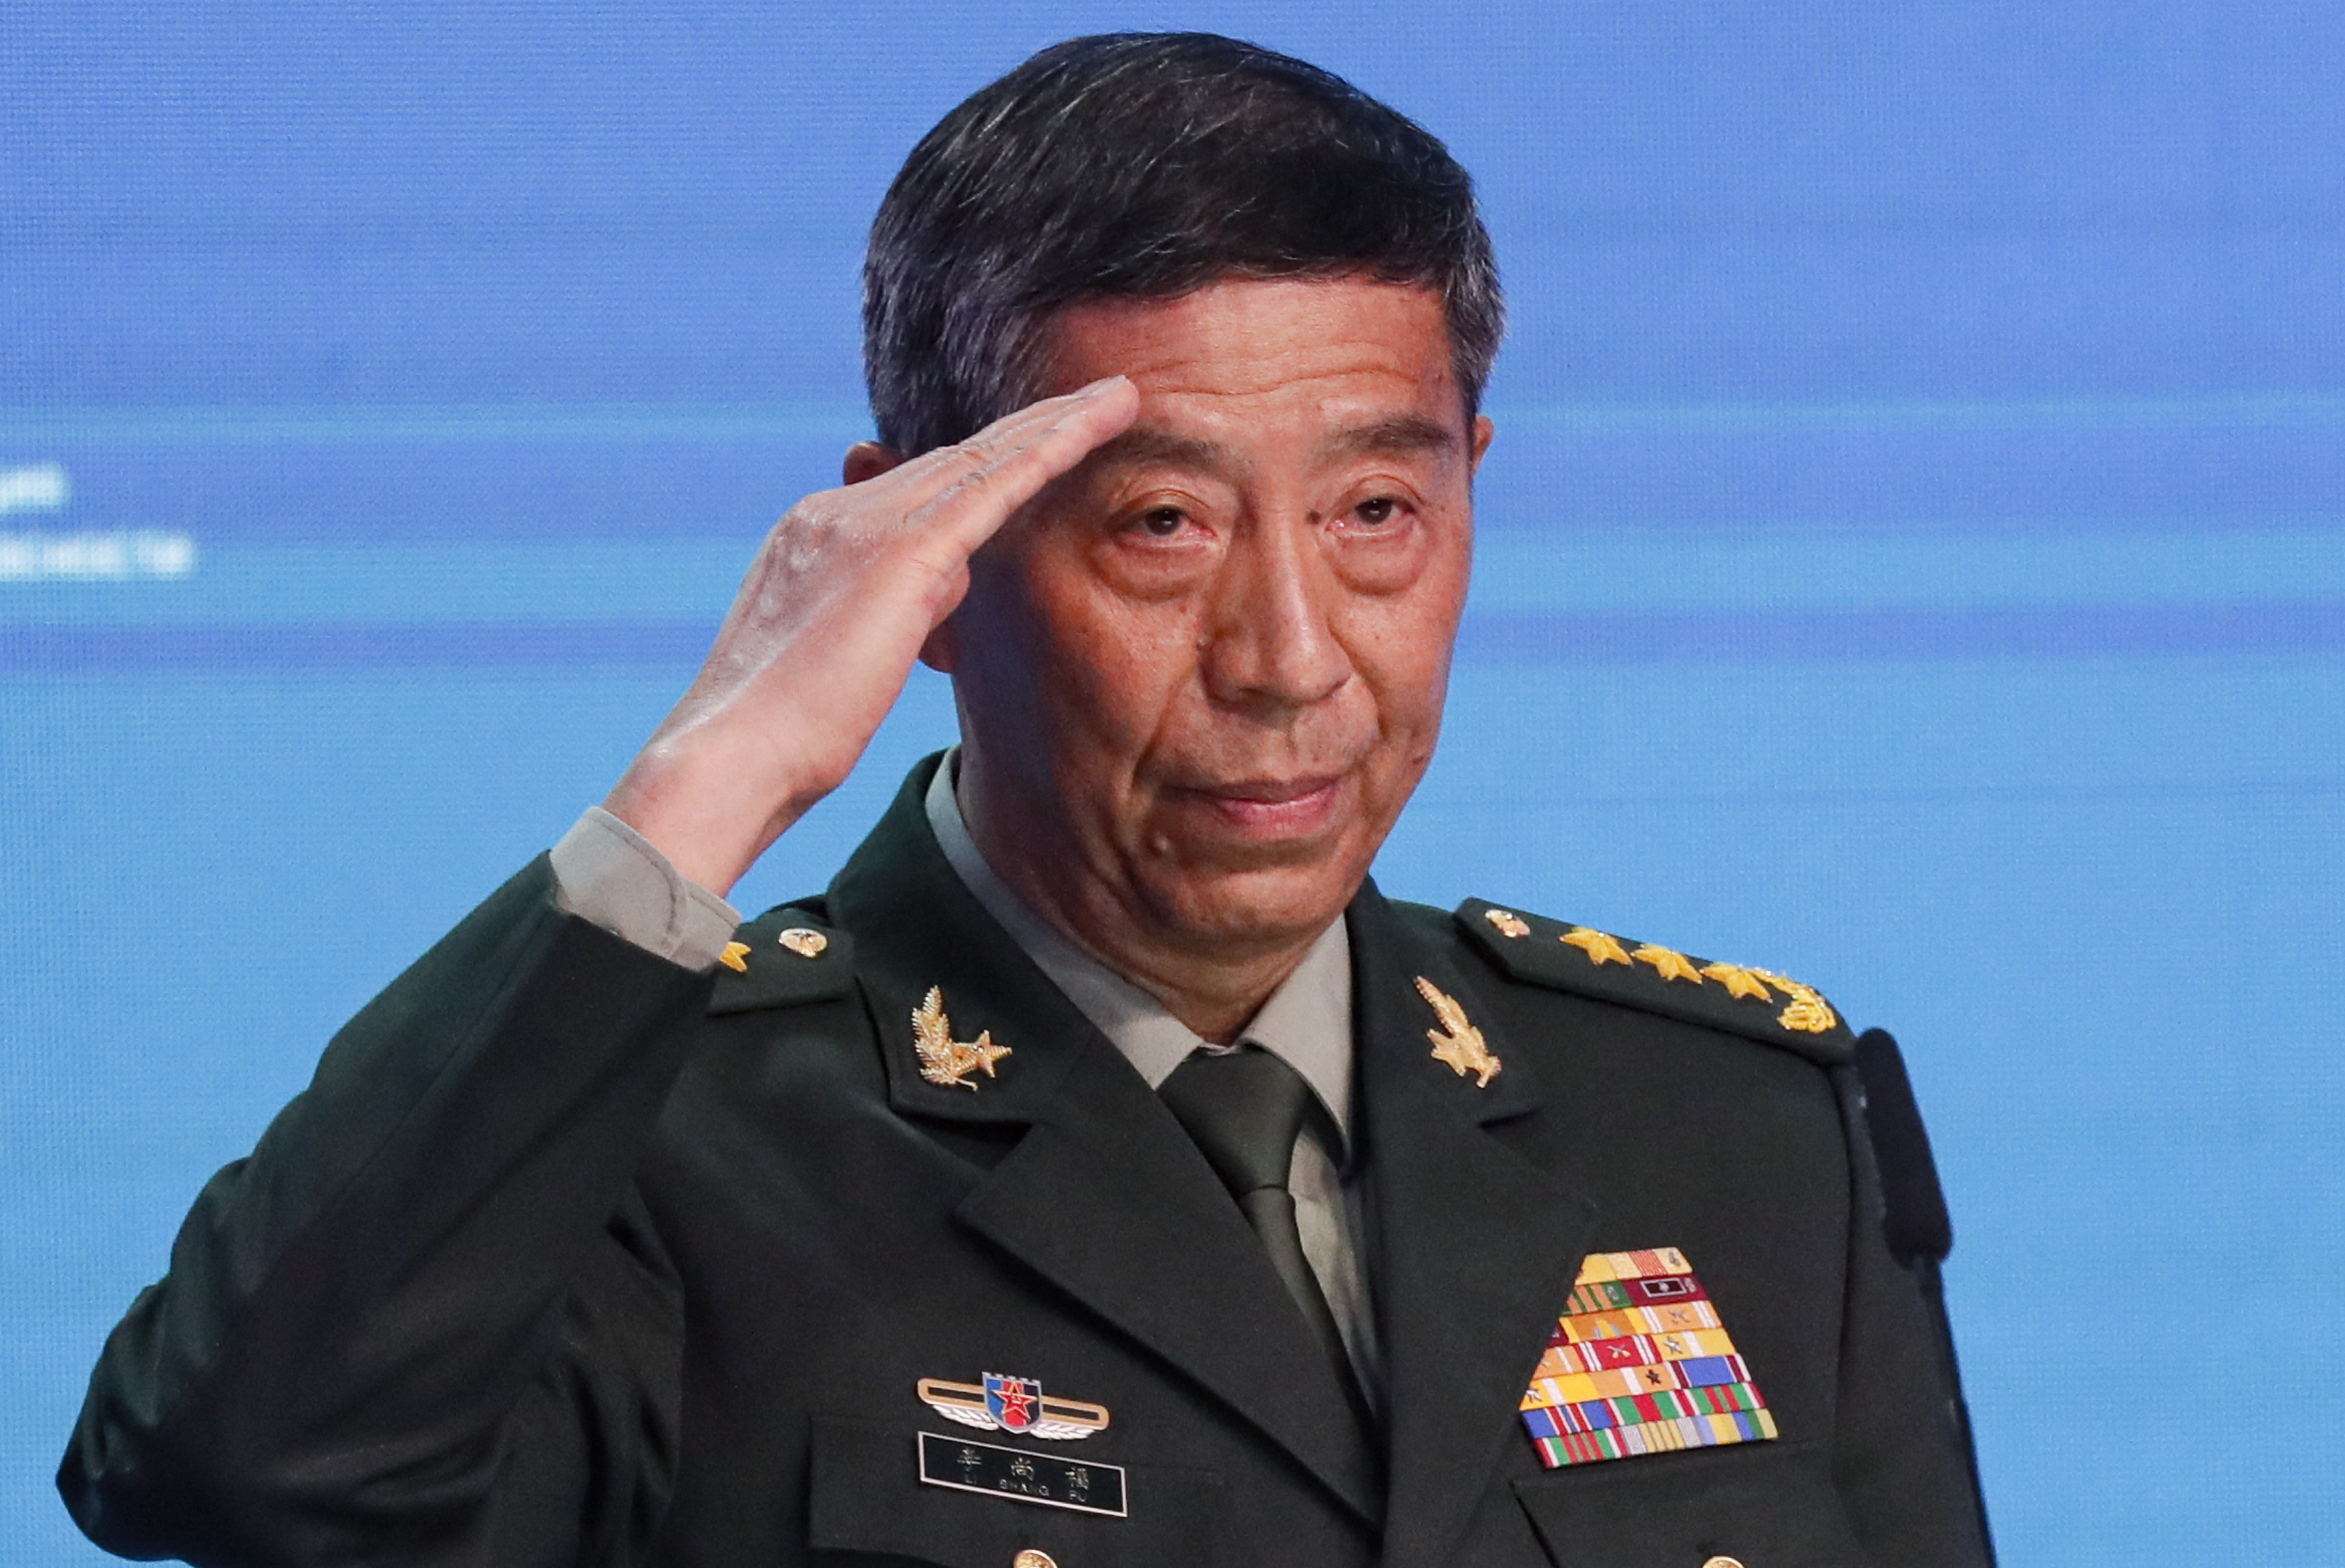 Defence Minister General Li Shangfu told the forum that “the principle of seeing each other as equals will not change in China-Africa cooperation”. Photo: EPA-EFE